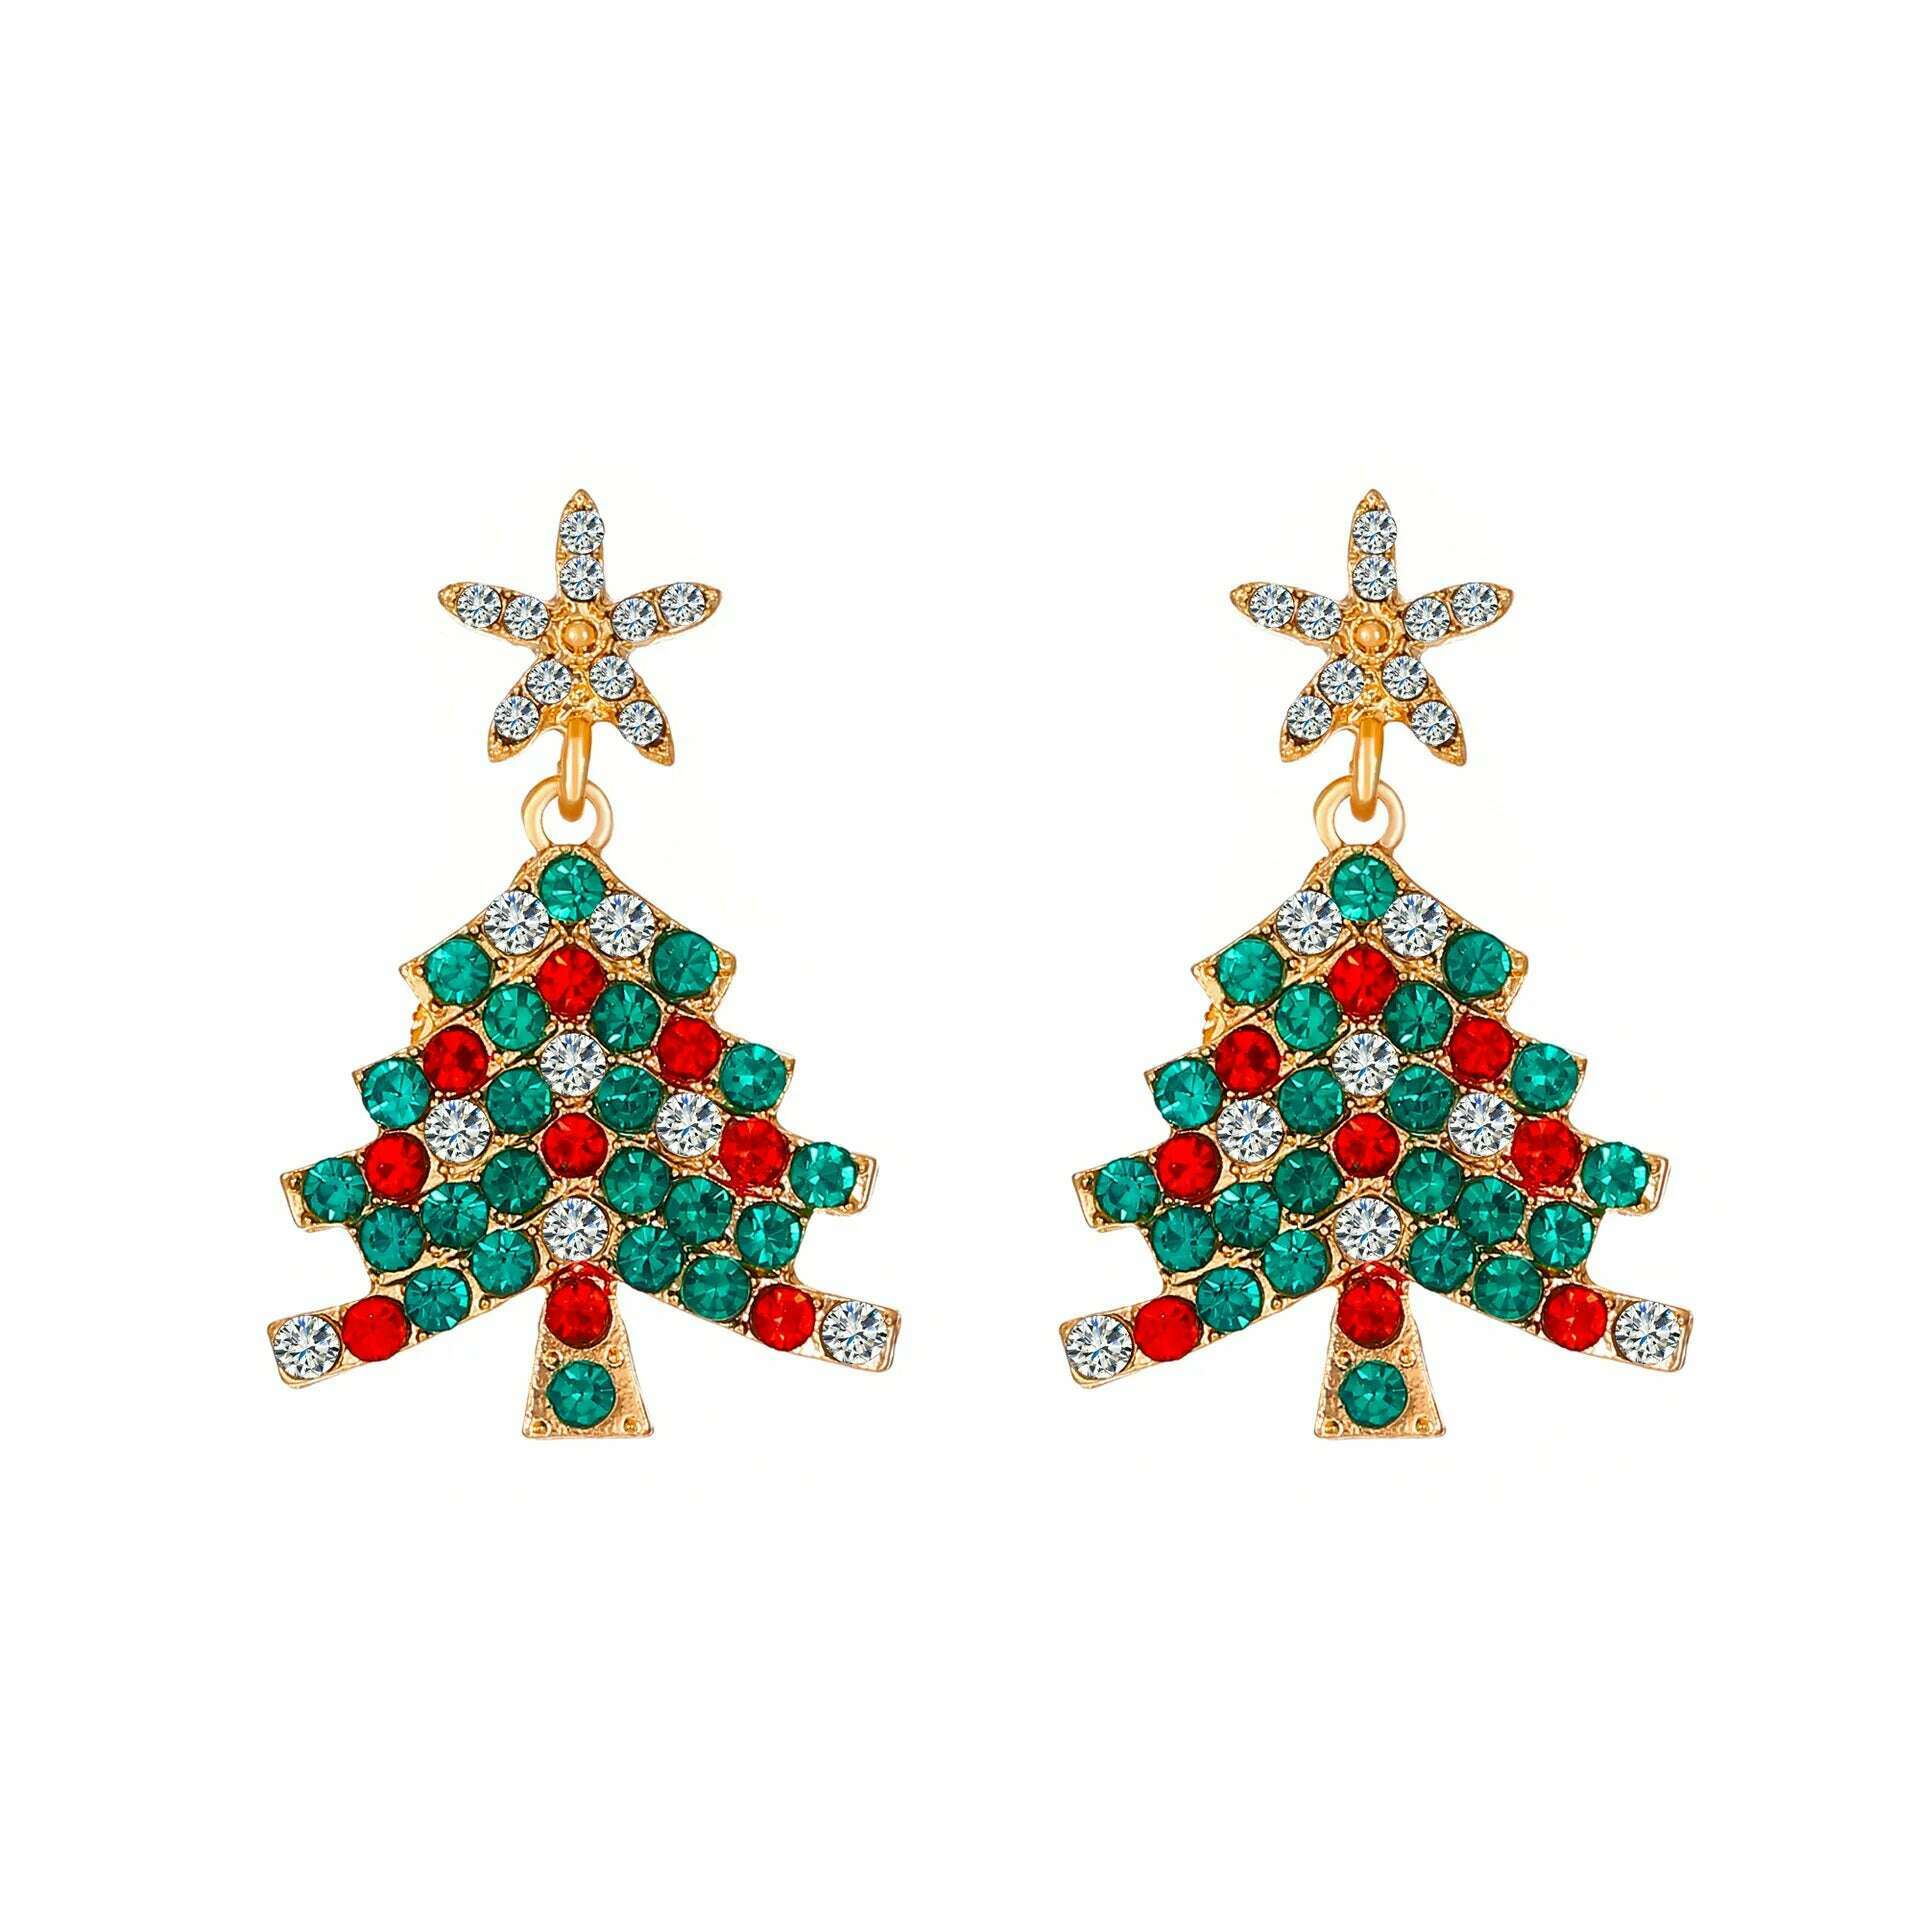 KIMLUD, New Full Inlaid Colorful Zircon Christmas Tree Tassel Earrings Women's Fashion Personality Earrings Party Jewelry Christmas Gift, B, KIMLUD Women's Clothes